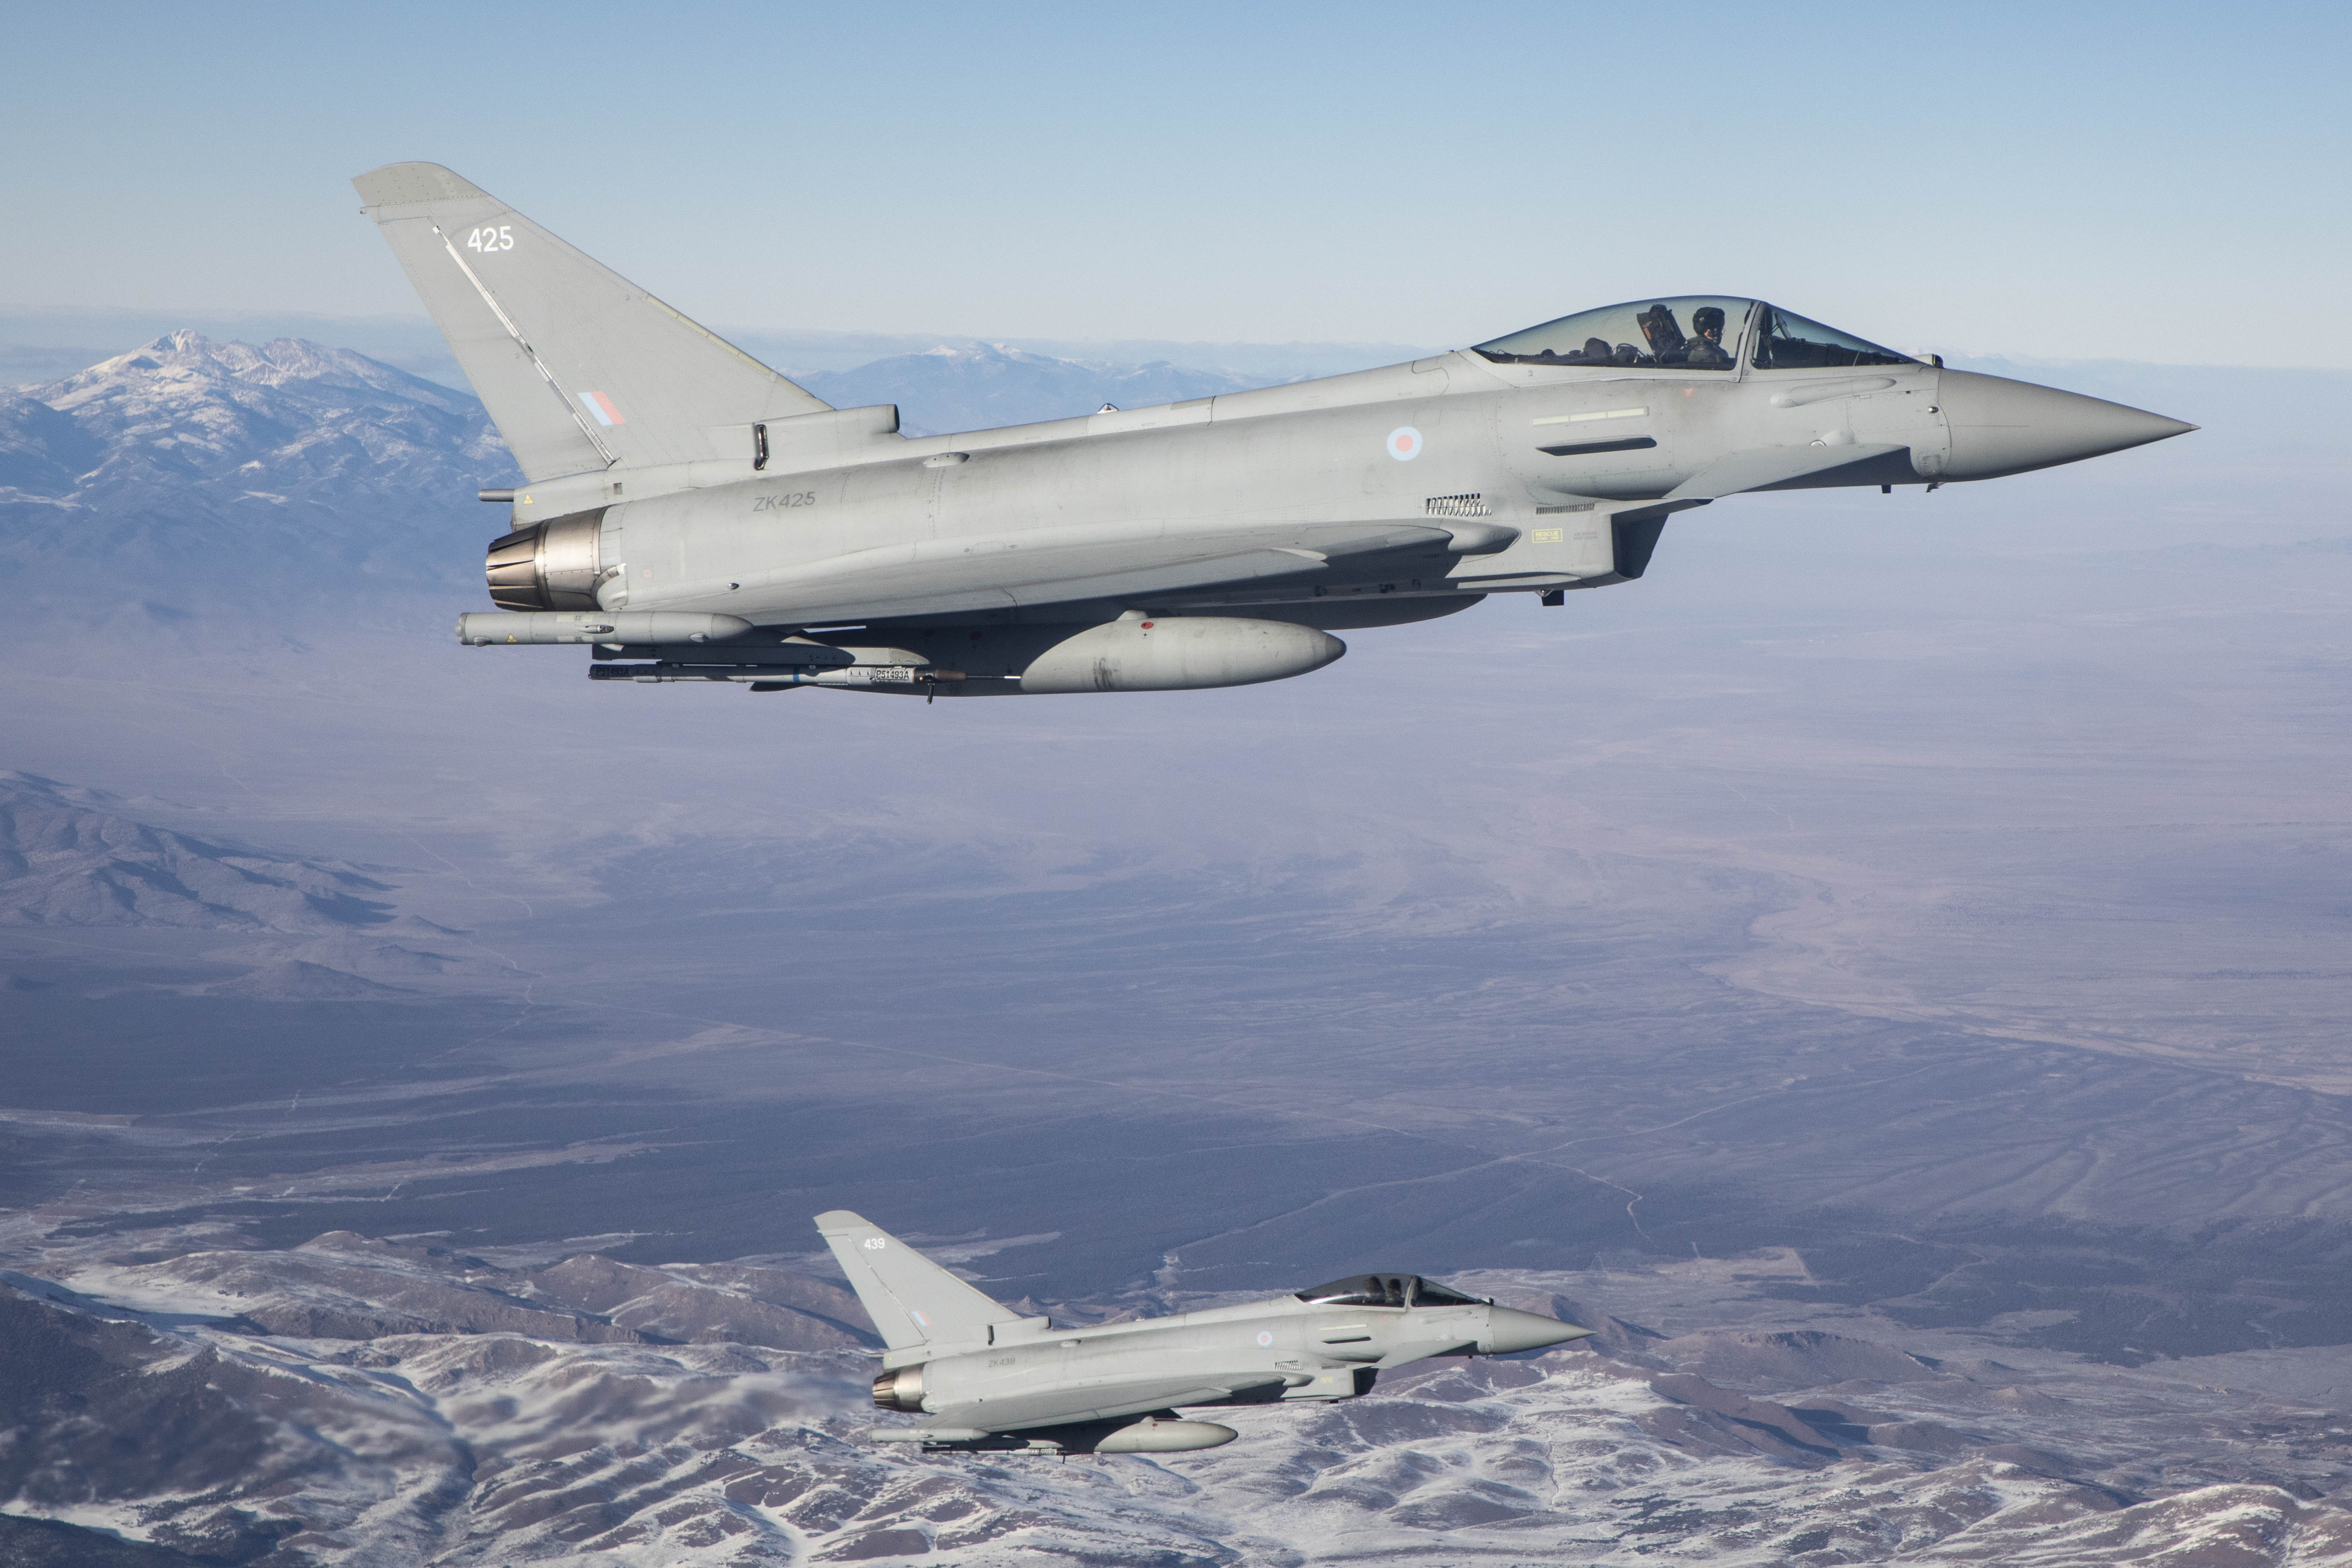 A Royal Air Force Voyager provides Air to Air refuelling capability on Exercise Red Flag